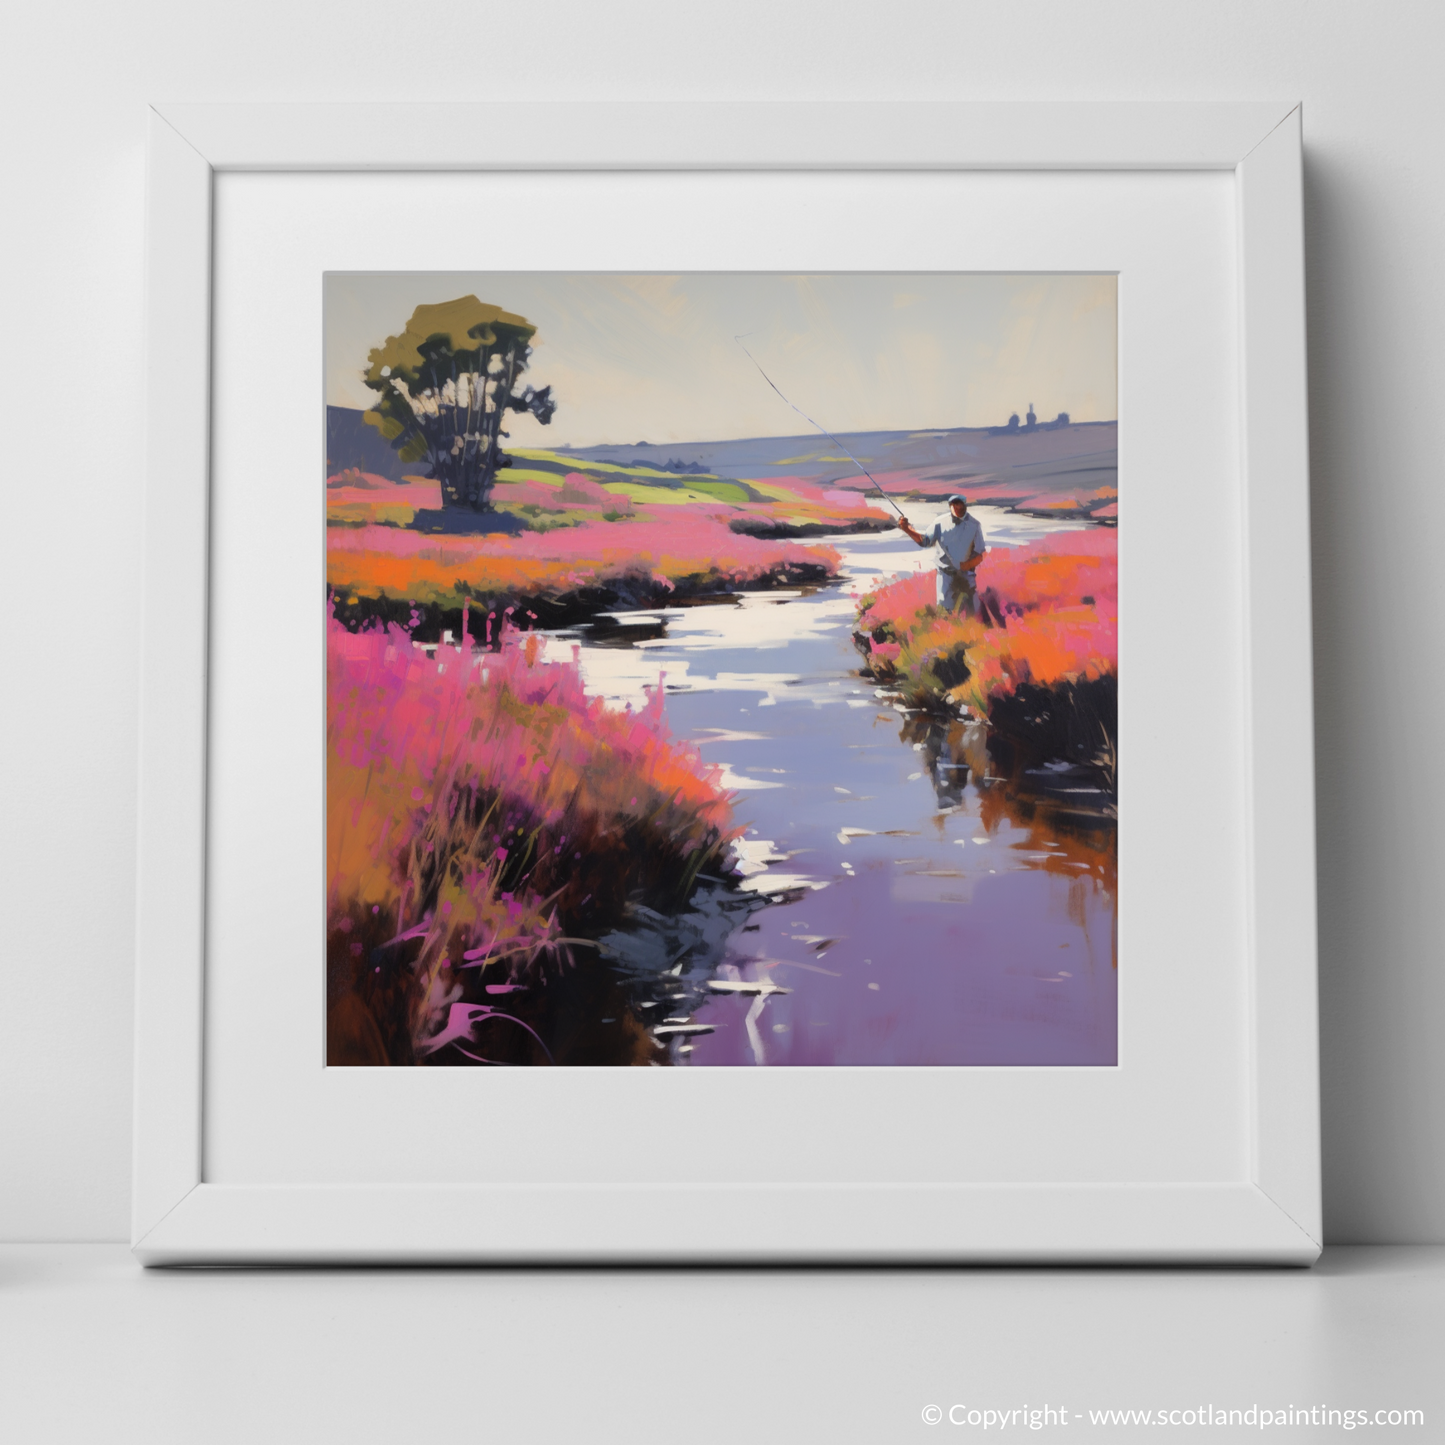 Heather Bloom by the River Conon: A Fly Fishing Reverie